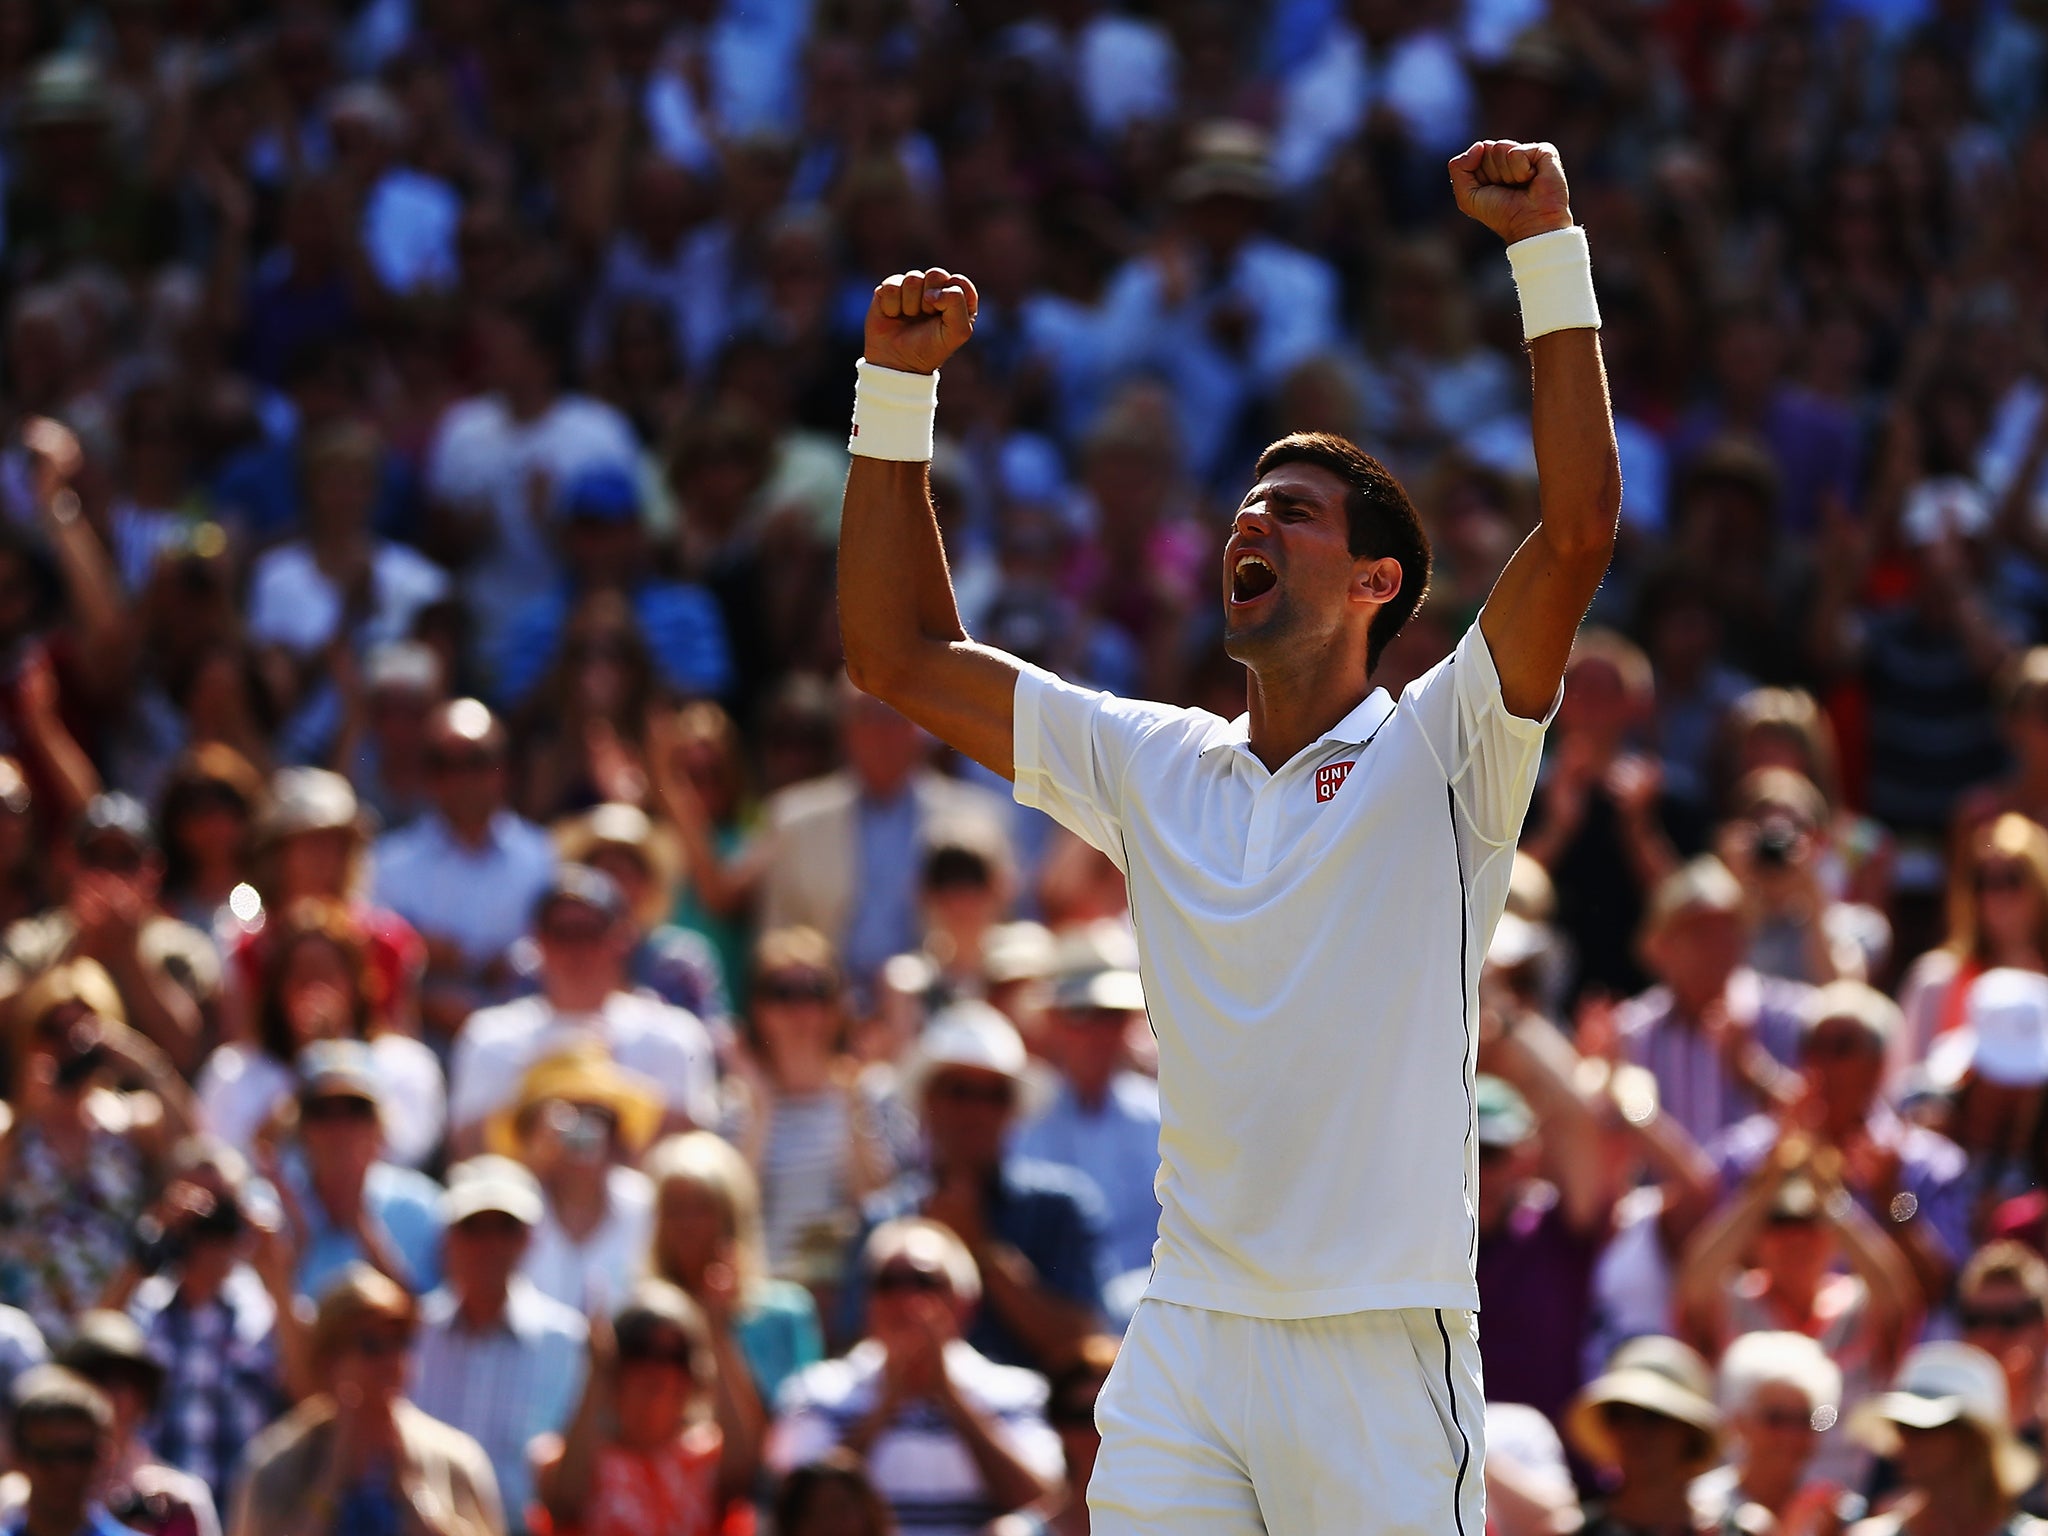 Djokovic pictured celebrating victory over Dimitrov in the semi-finals of Wimbledon